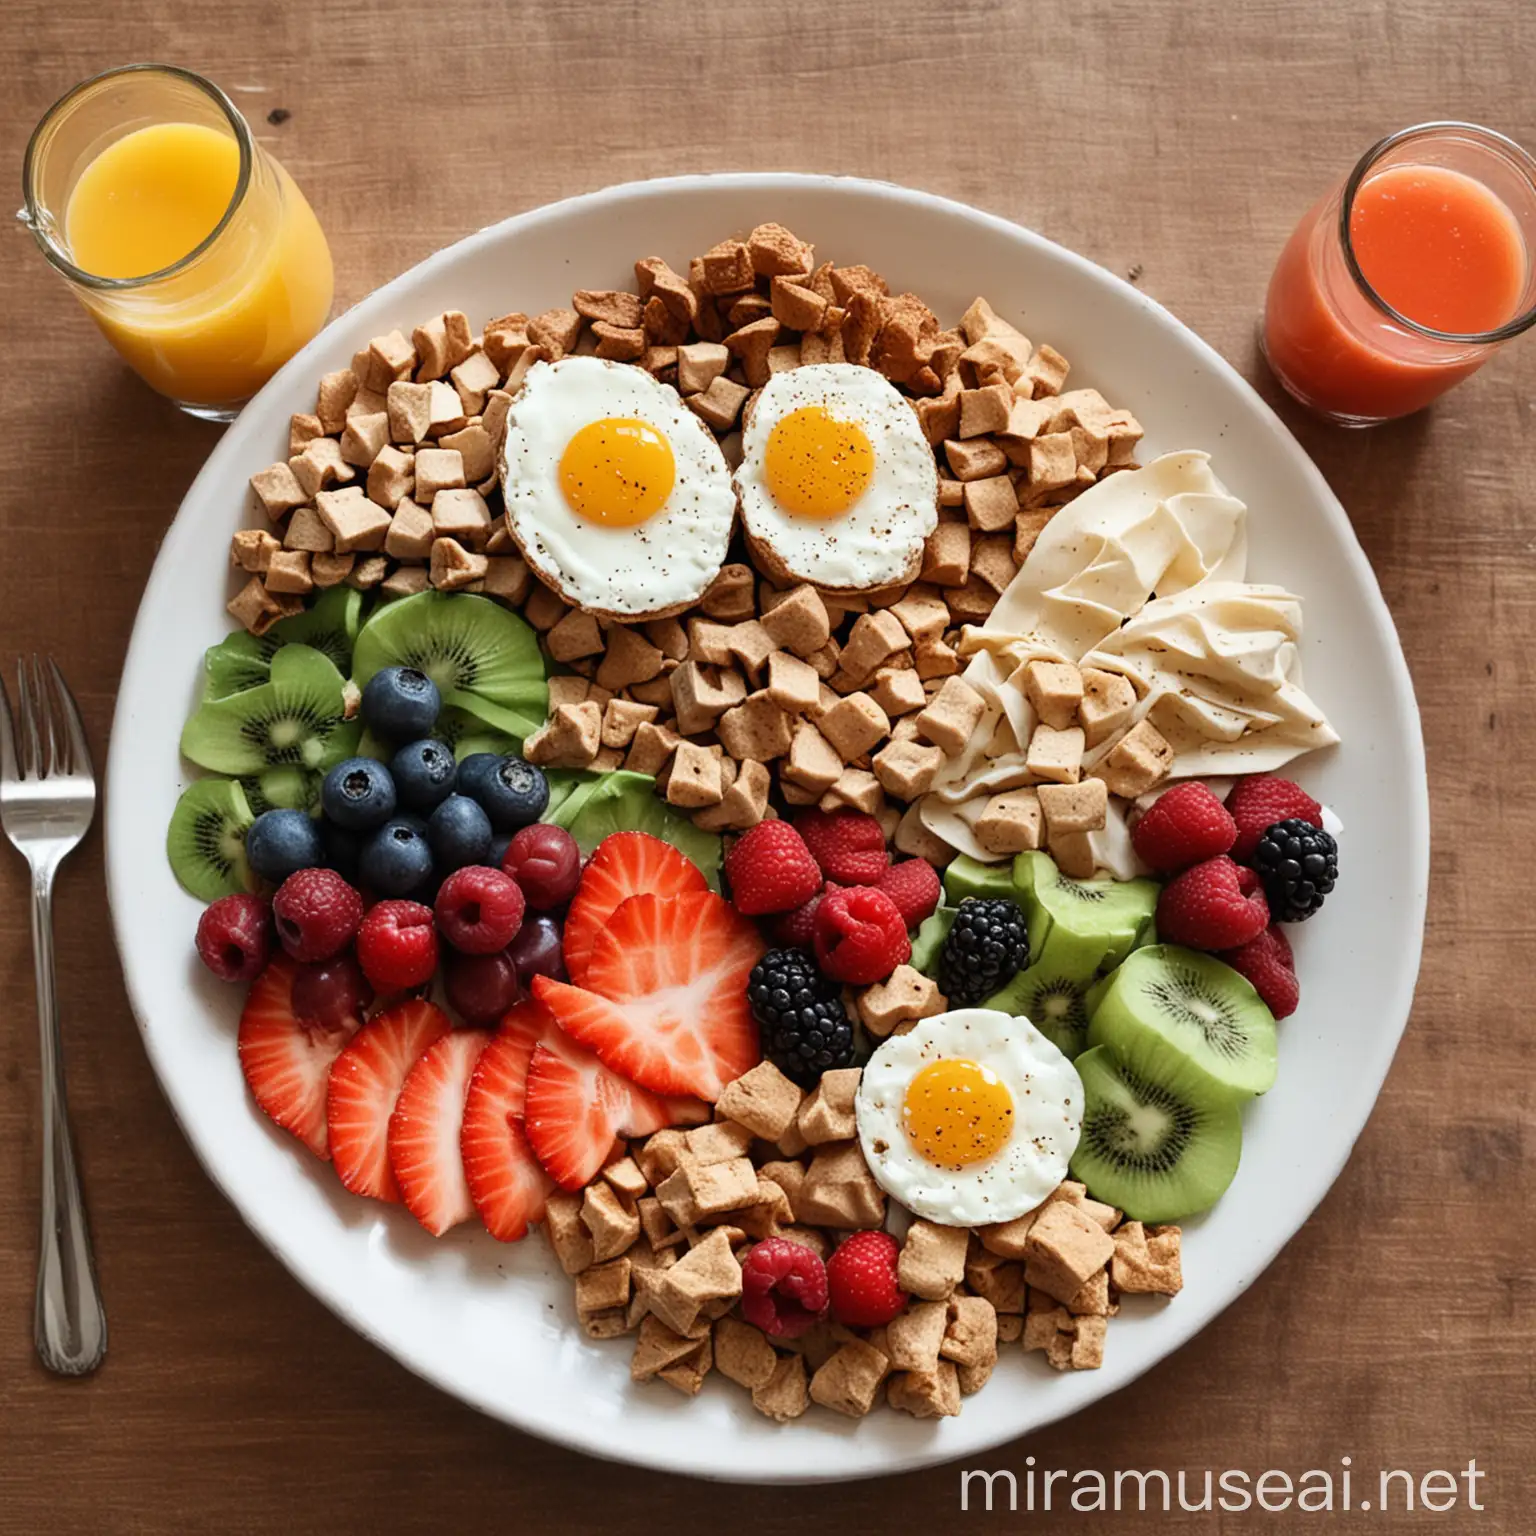 Fresh and Nutritious Breakfast Spread Colorful Fruits and Whole Grains